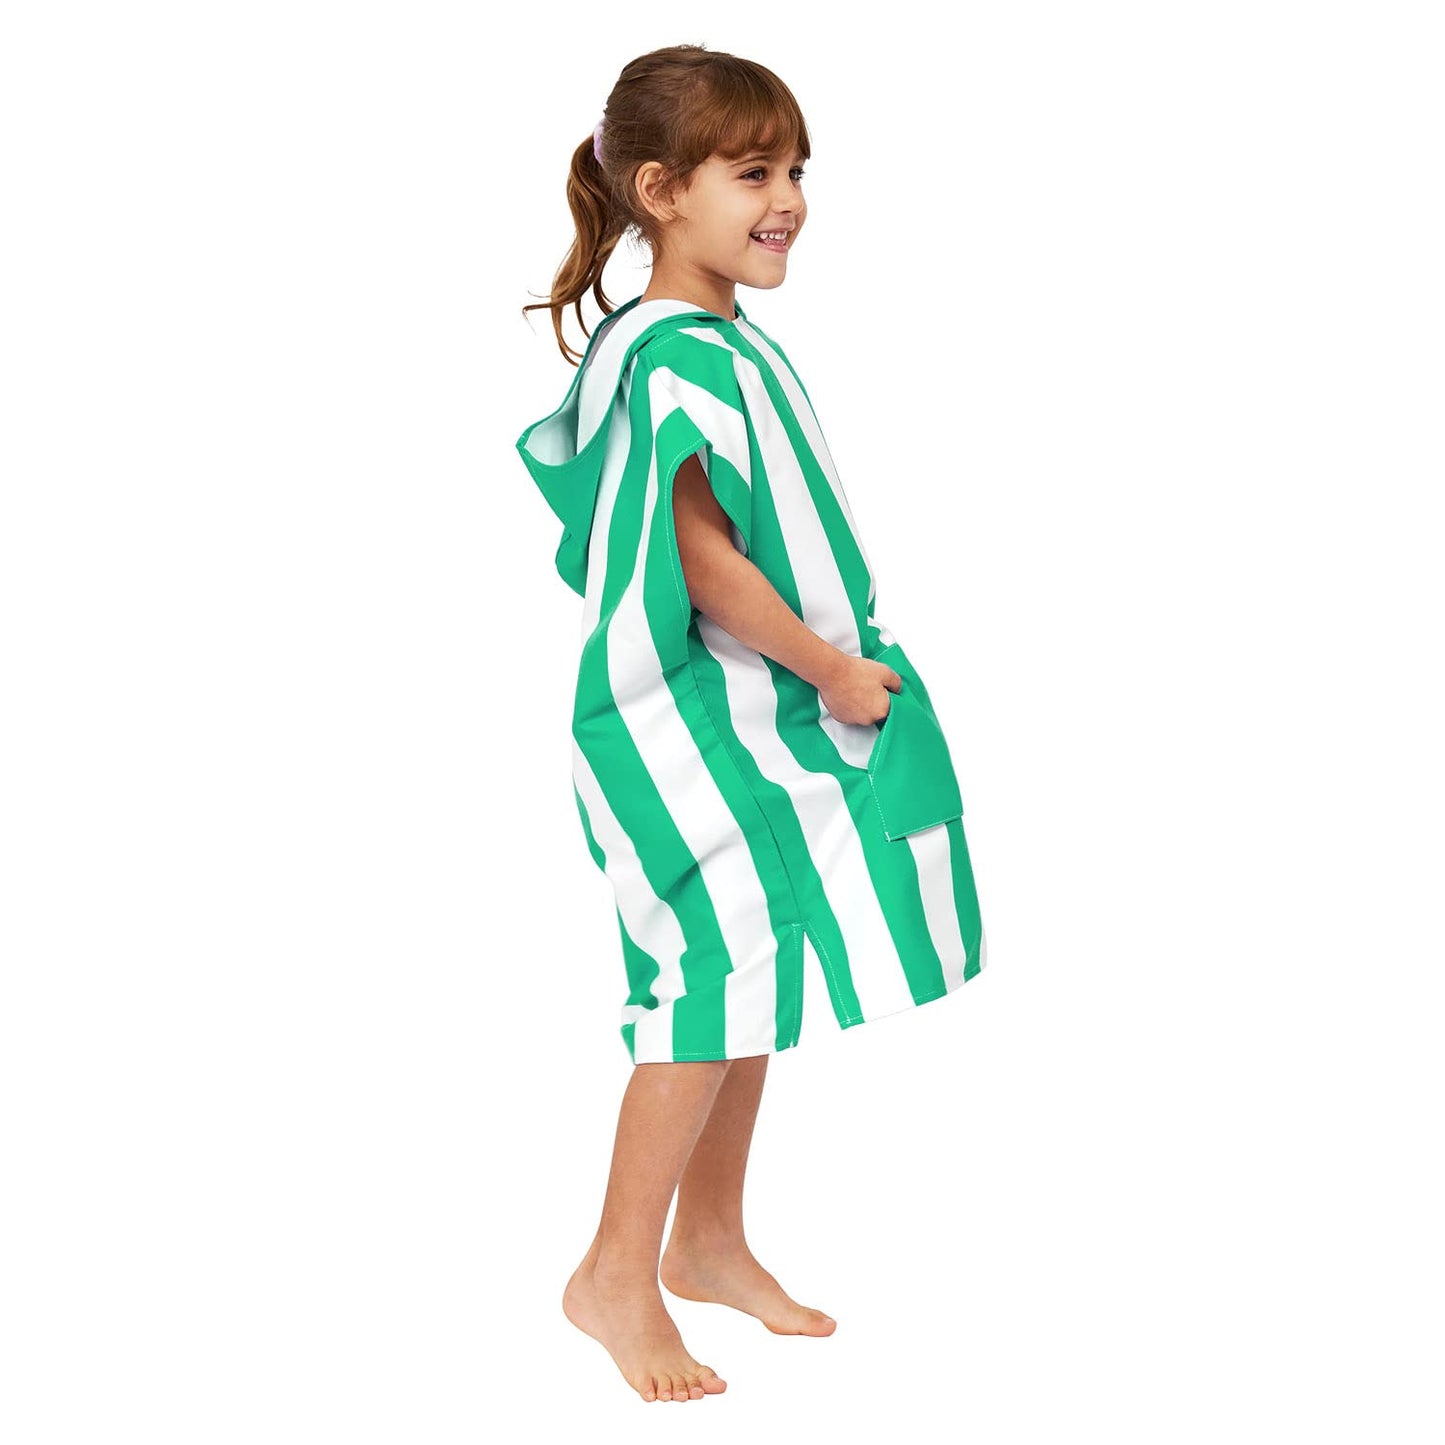 Dock & Bay Poncho with Hood  for Kids Ages 4-7 - Super Absorbent, Quick Dry - Includes Bag - Cabana - Cancun Green, Small (Age 4-7) - Opticdeals